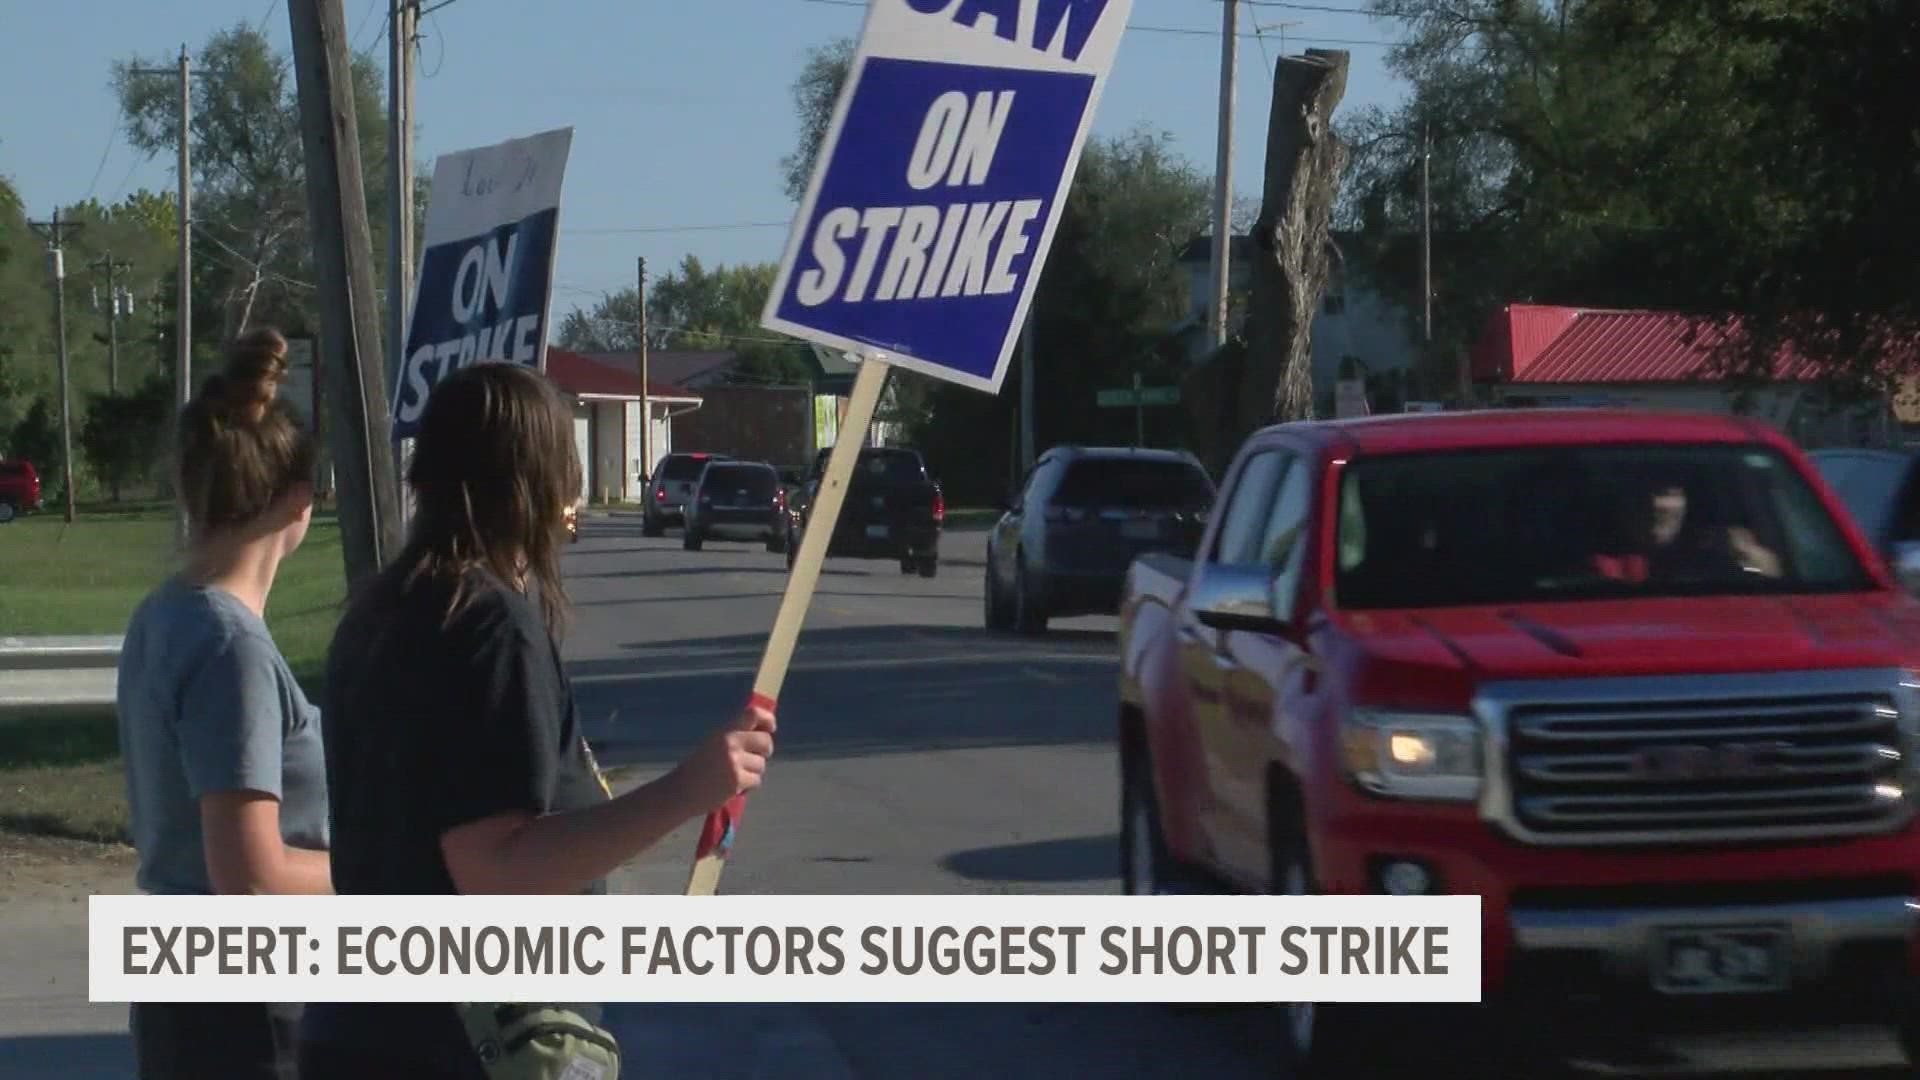 Vivid Tax Advisory Services President Cameron McCarty told Local 5 it's too early to tell how the strike will impact John Deere stockholders.